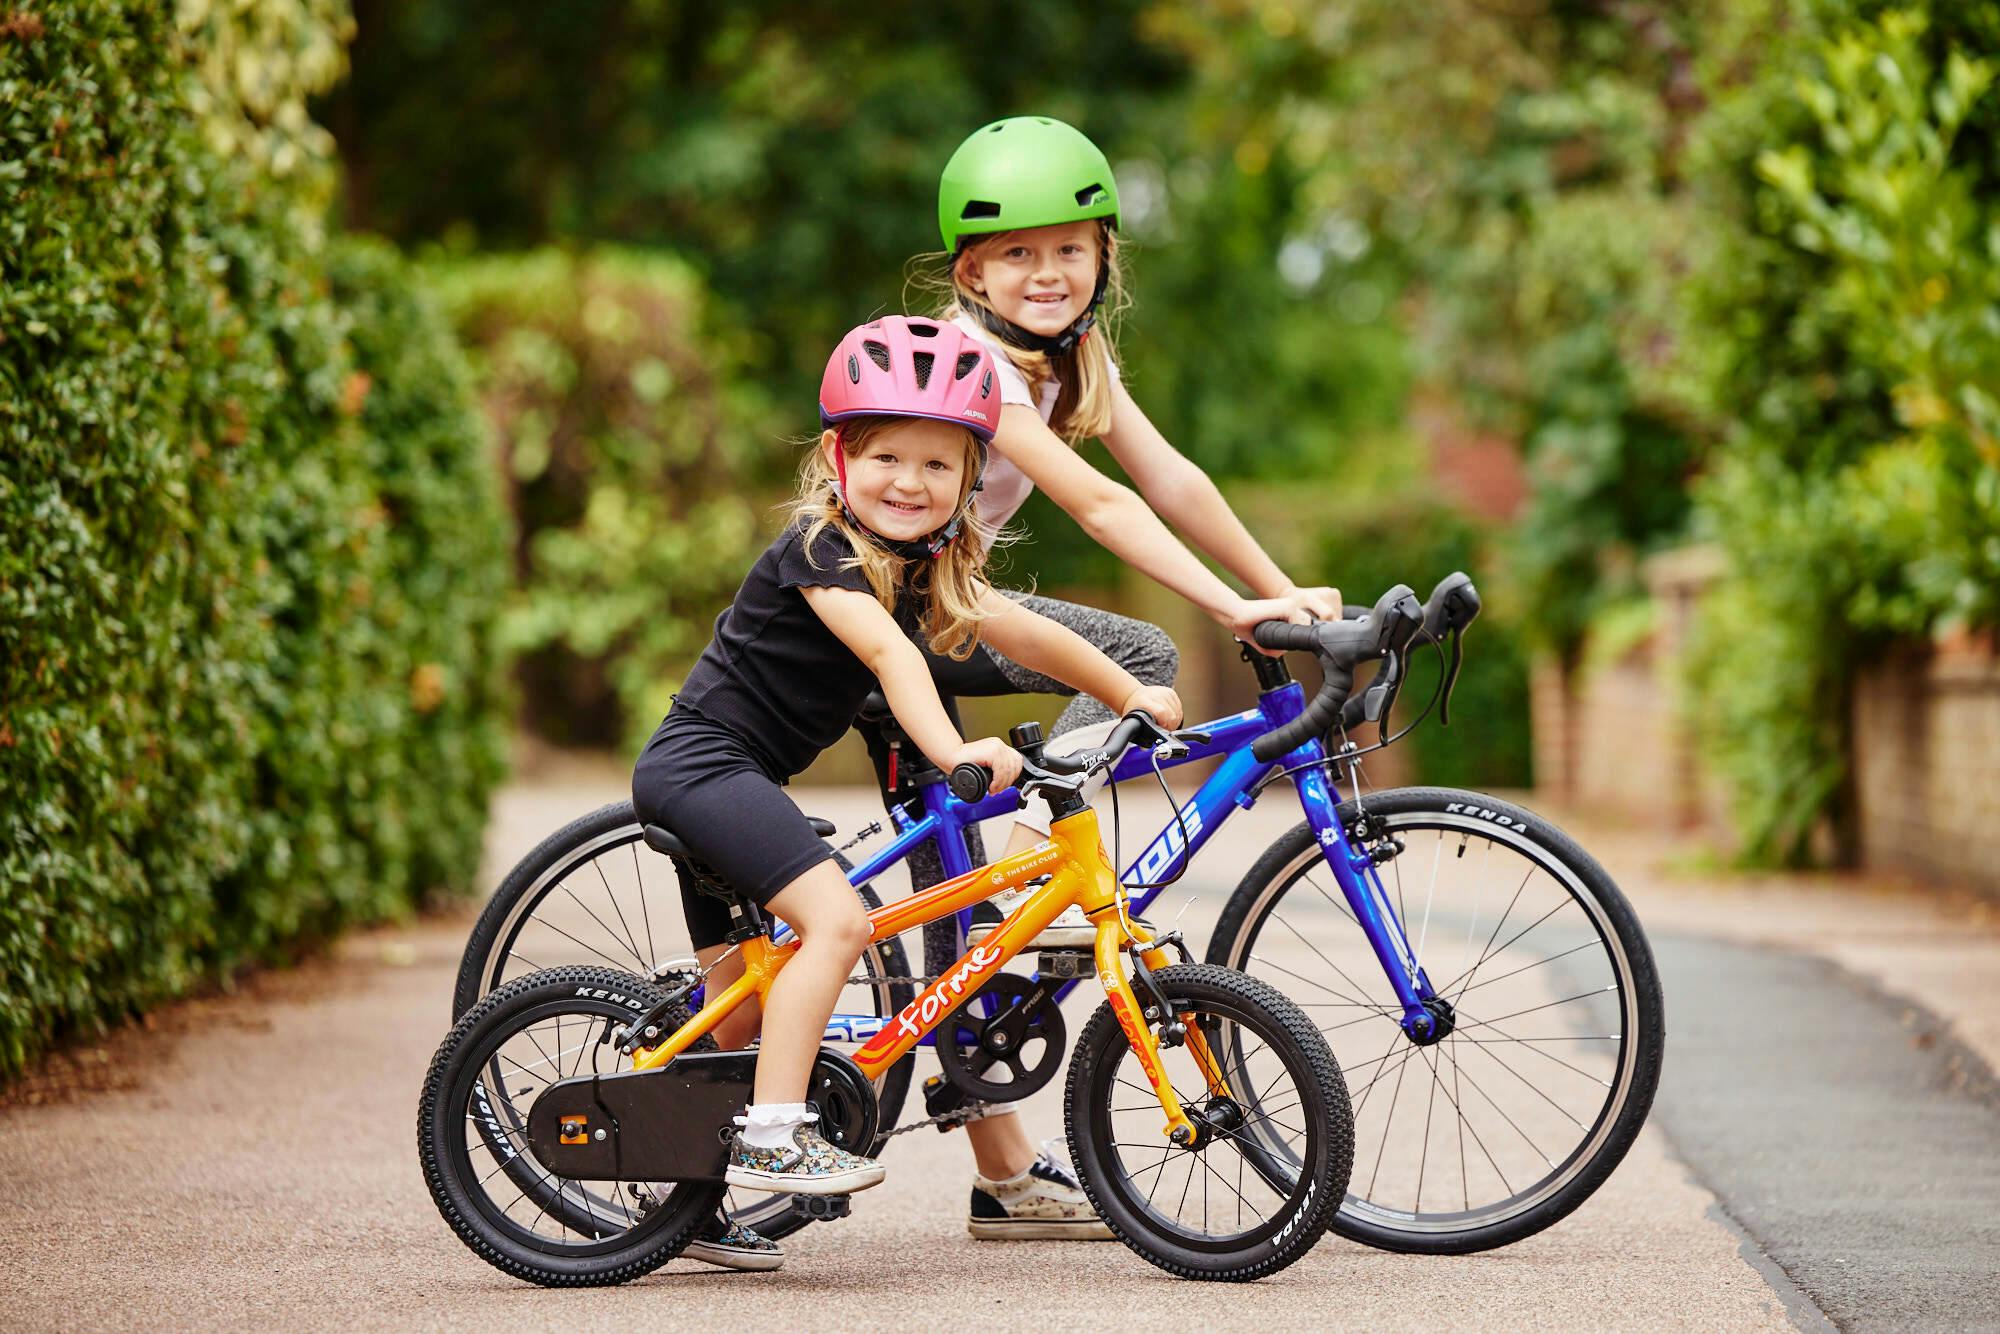 Two smiling girls on their bikes in summer